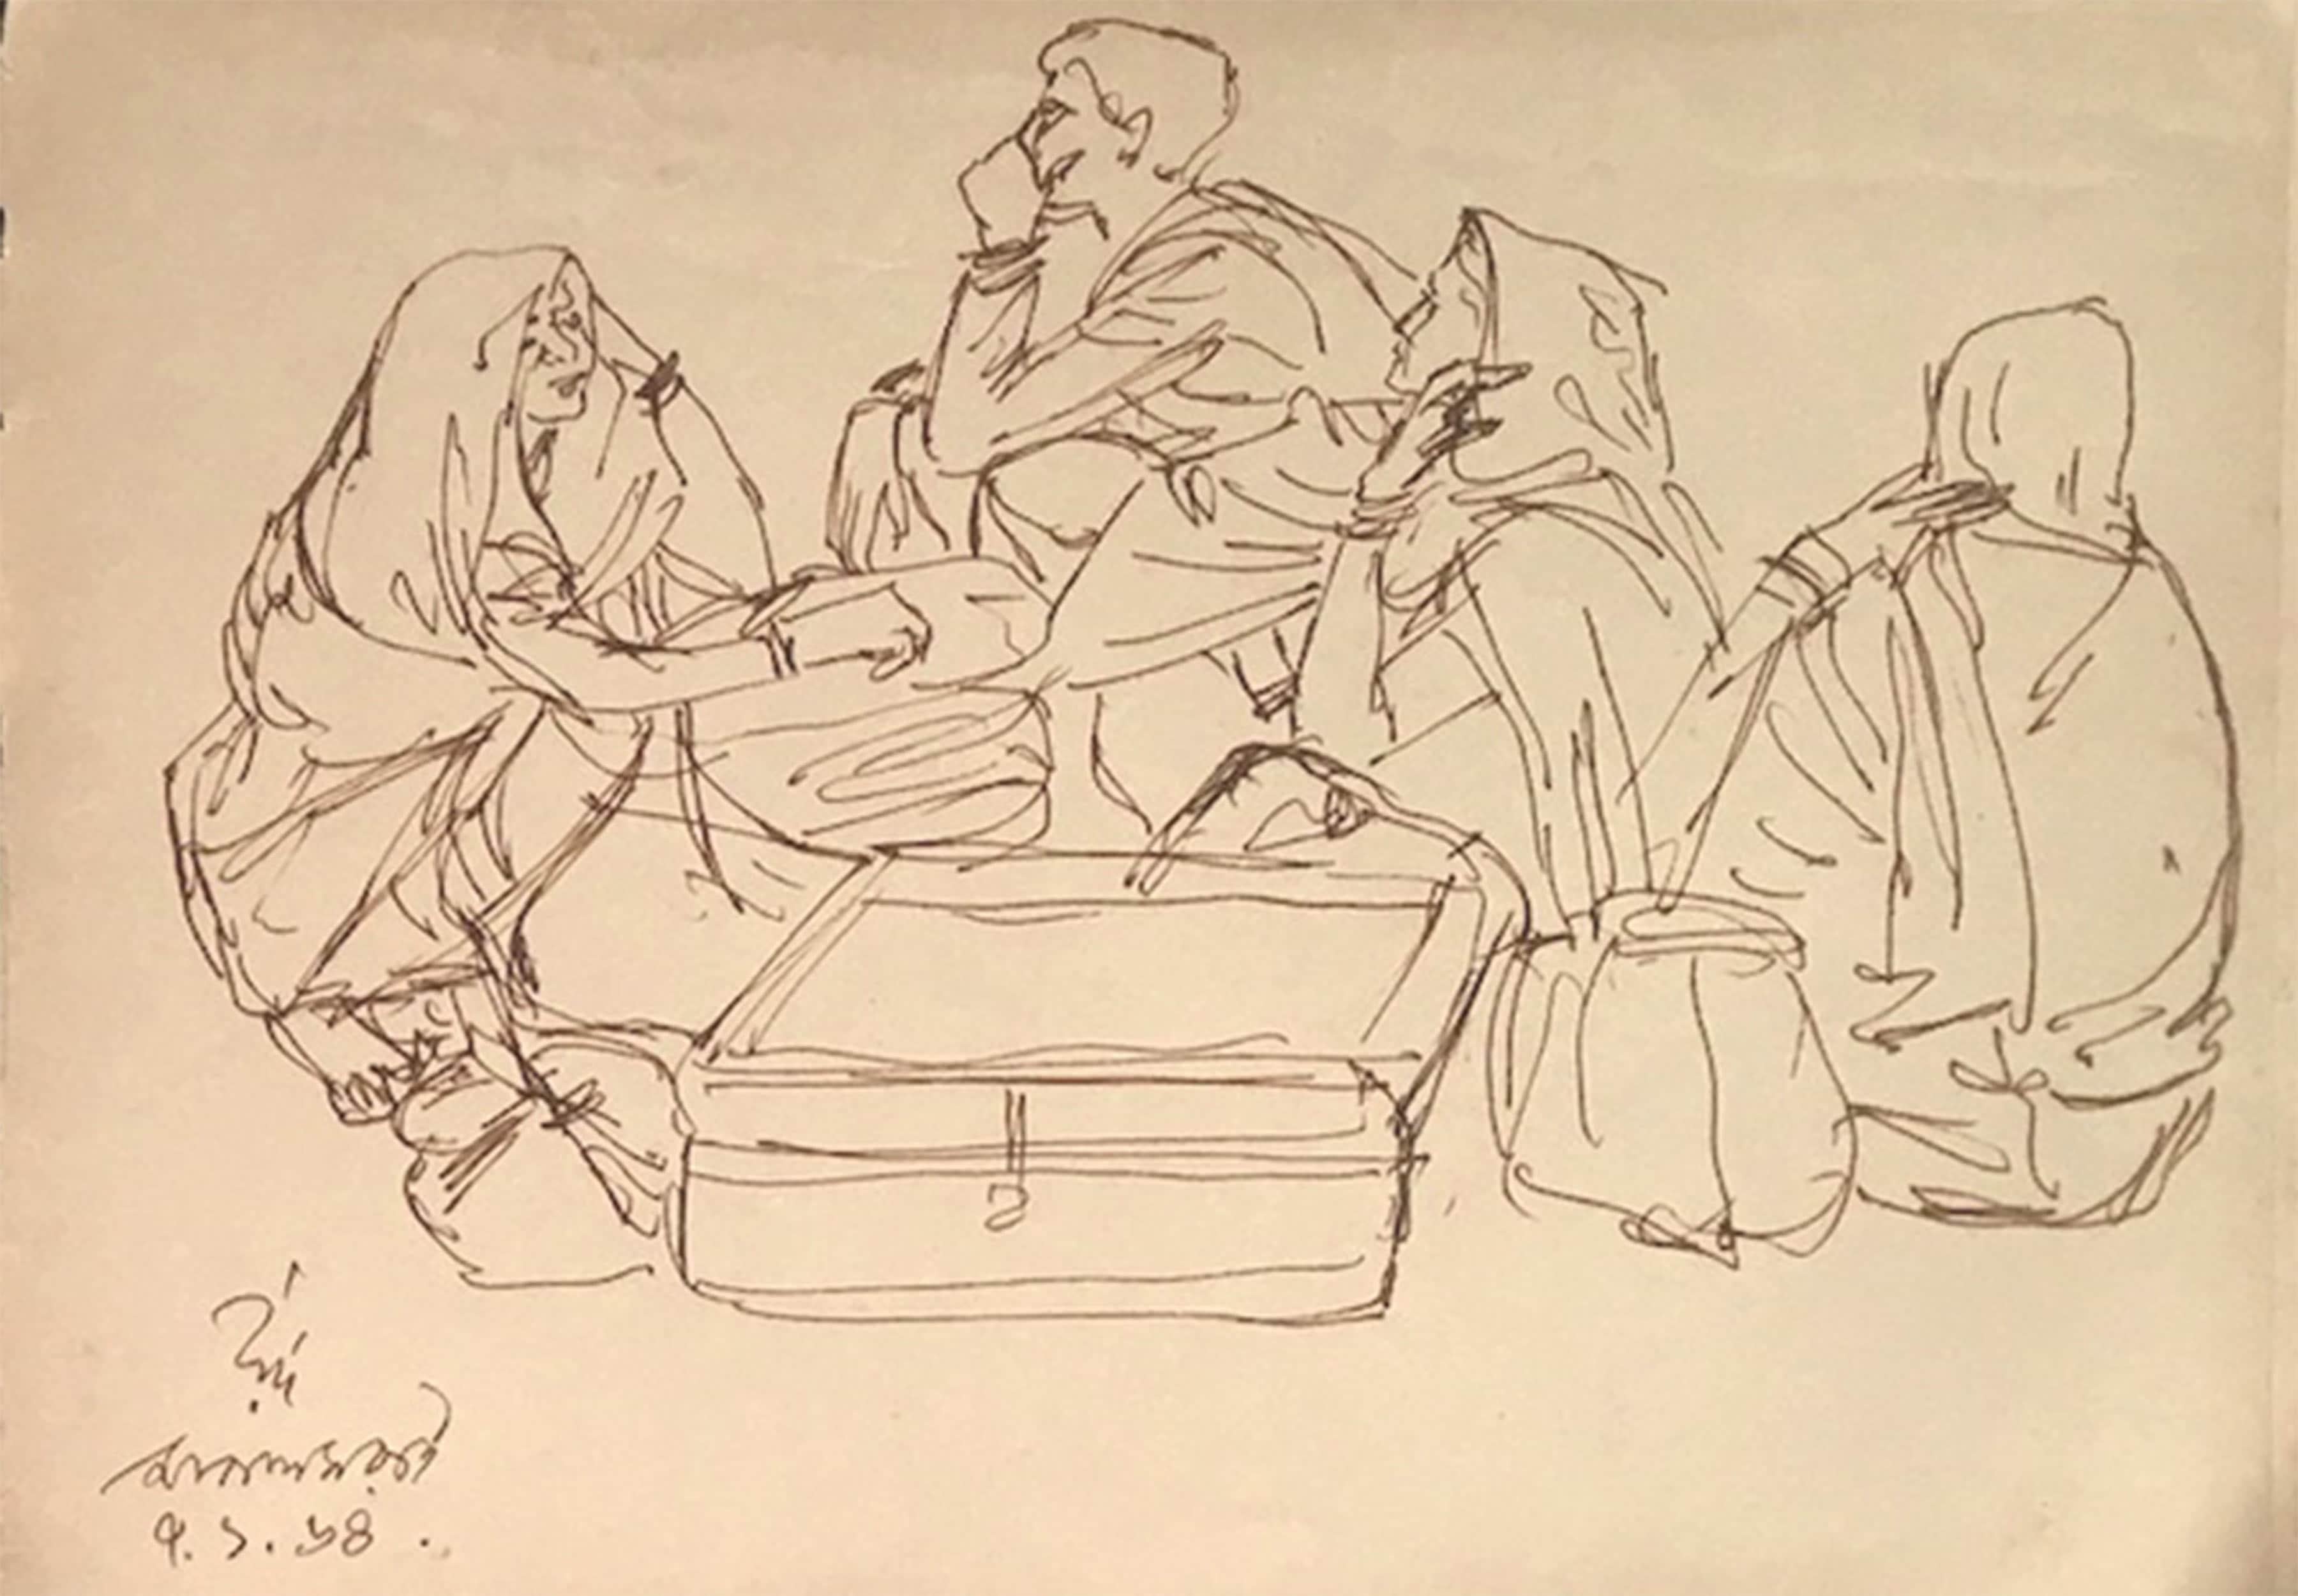 Indra Dugar Figurative Painting - Indian Rural Scene, Travelers, Luggage, Ink on Paper by Modern Artist "In Stock"